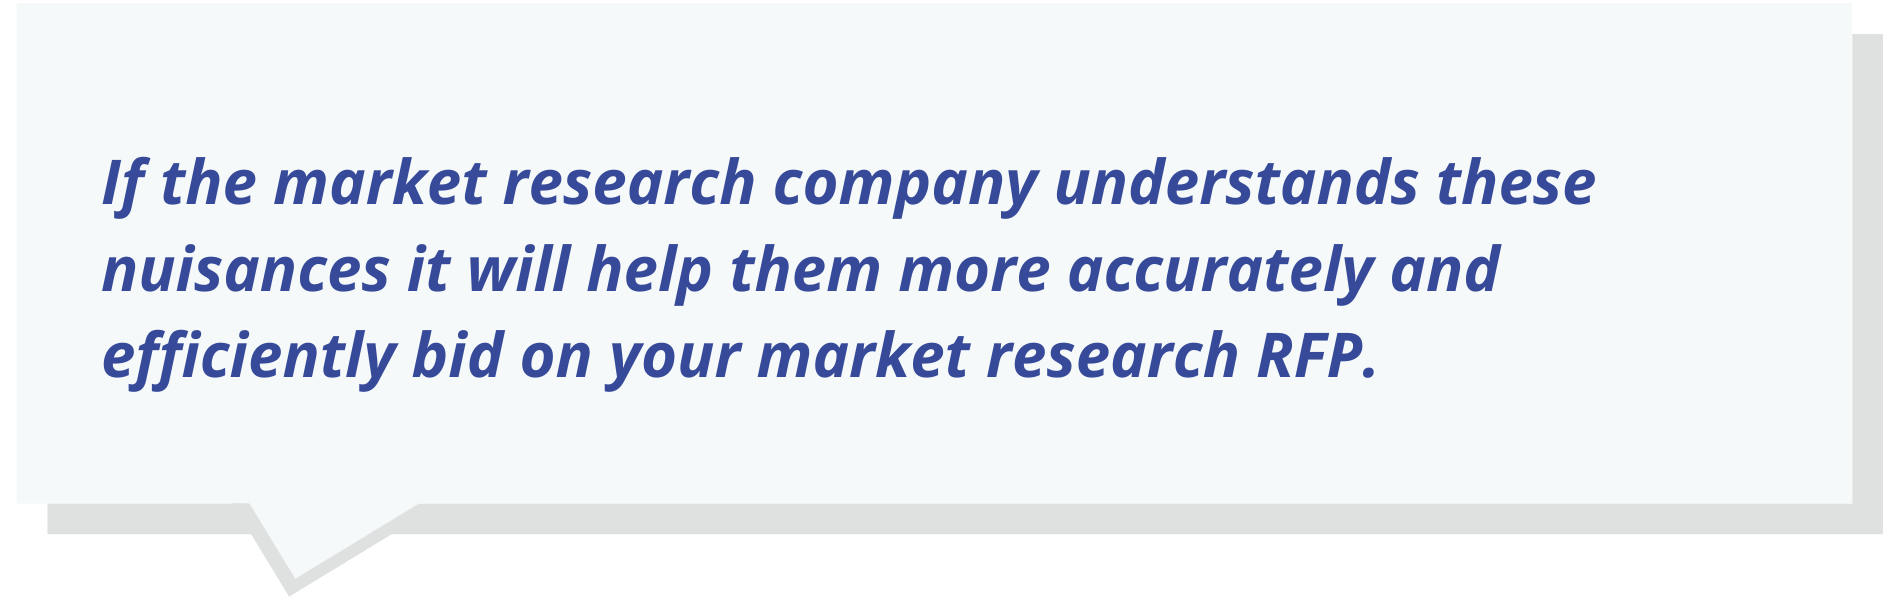 If the market research company understands these nuisances it will help them more accurately and efficiently bid on your market research RFP.